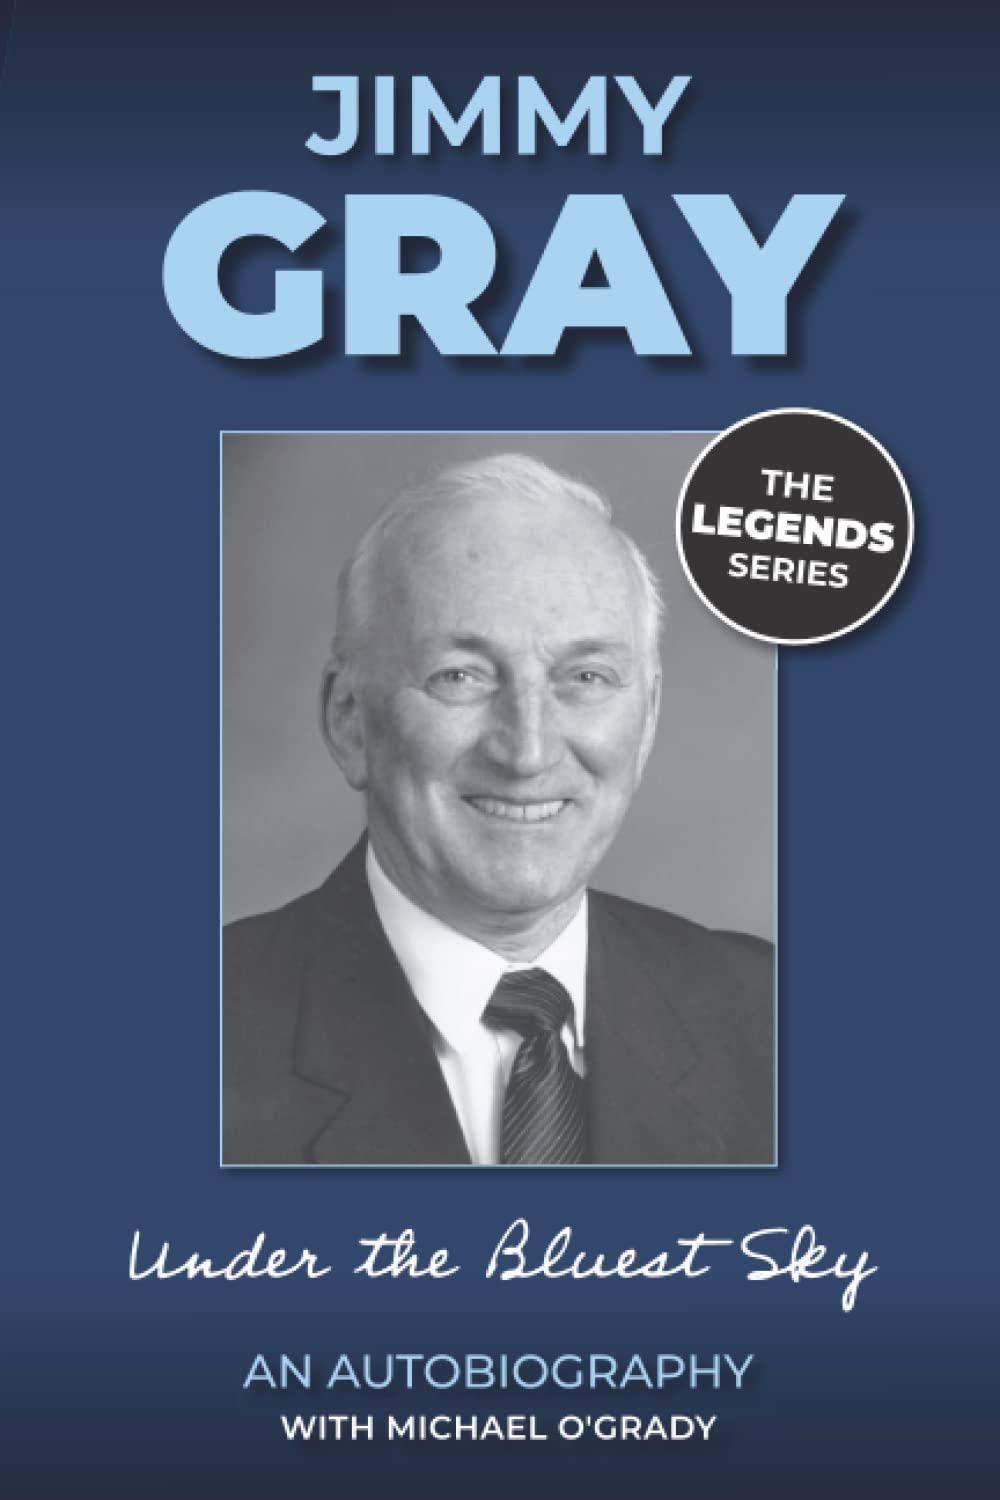 Jimmy Gray An Autobiography by Jimmy Gray